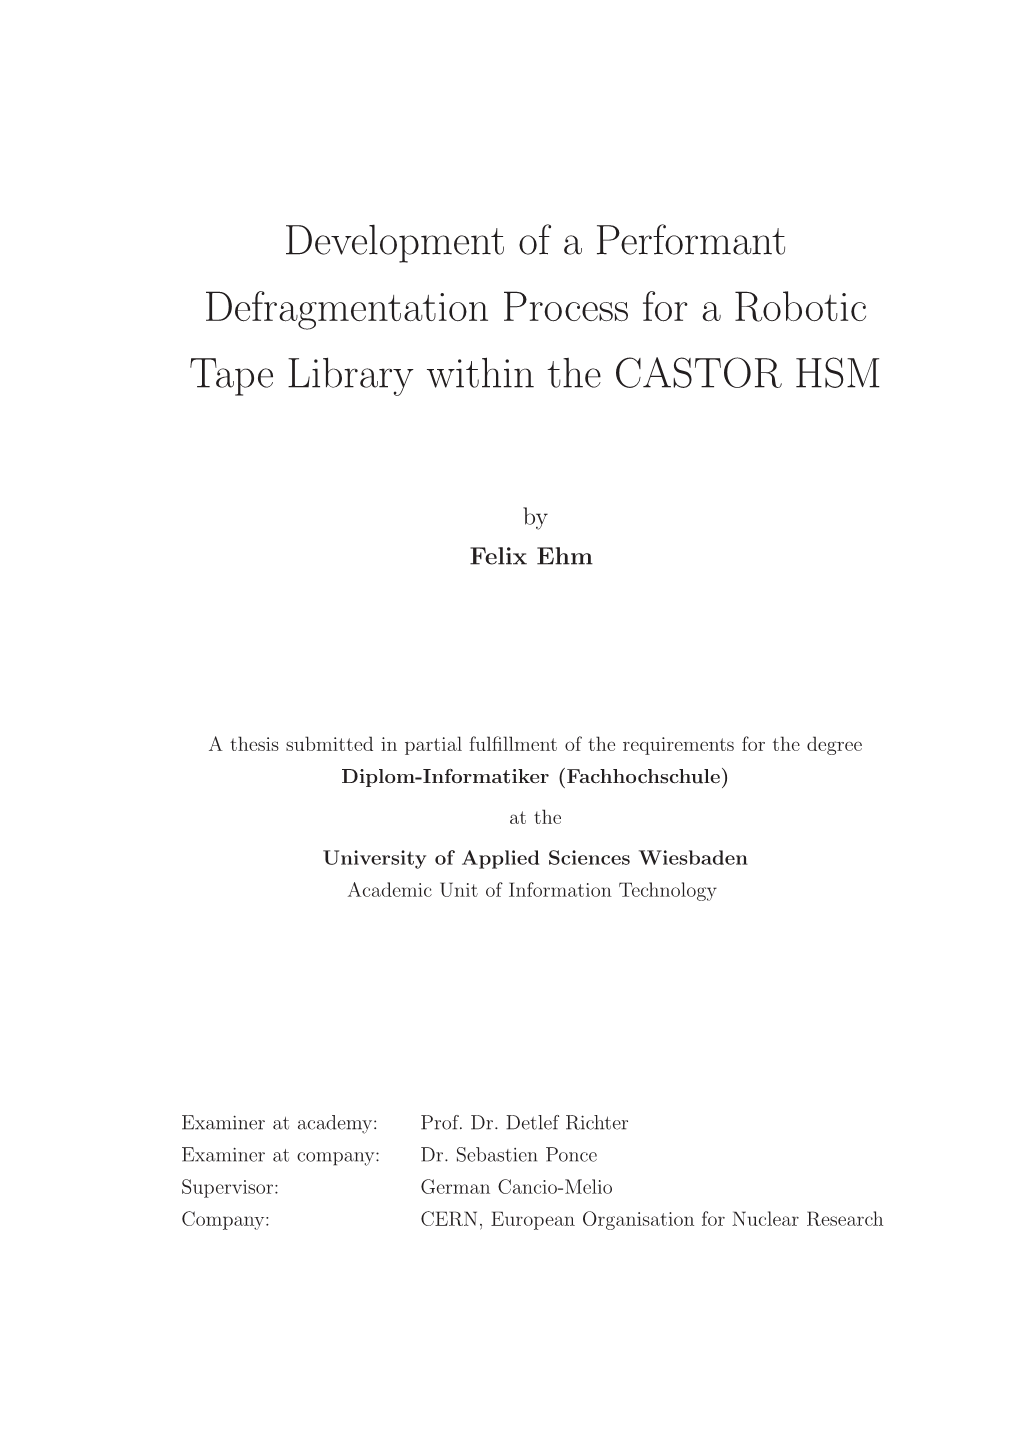 Development of a Performant Defragmentation Process for a Robotic Tape Library Within the CASTOR HSM